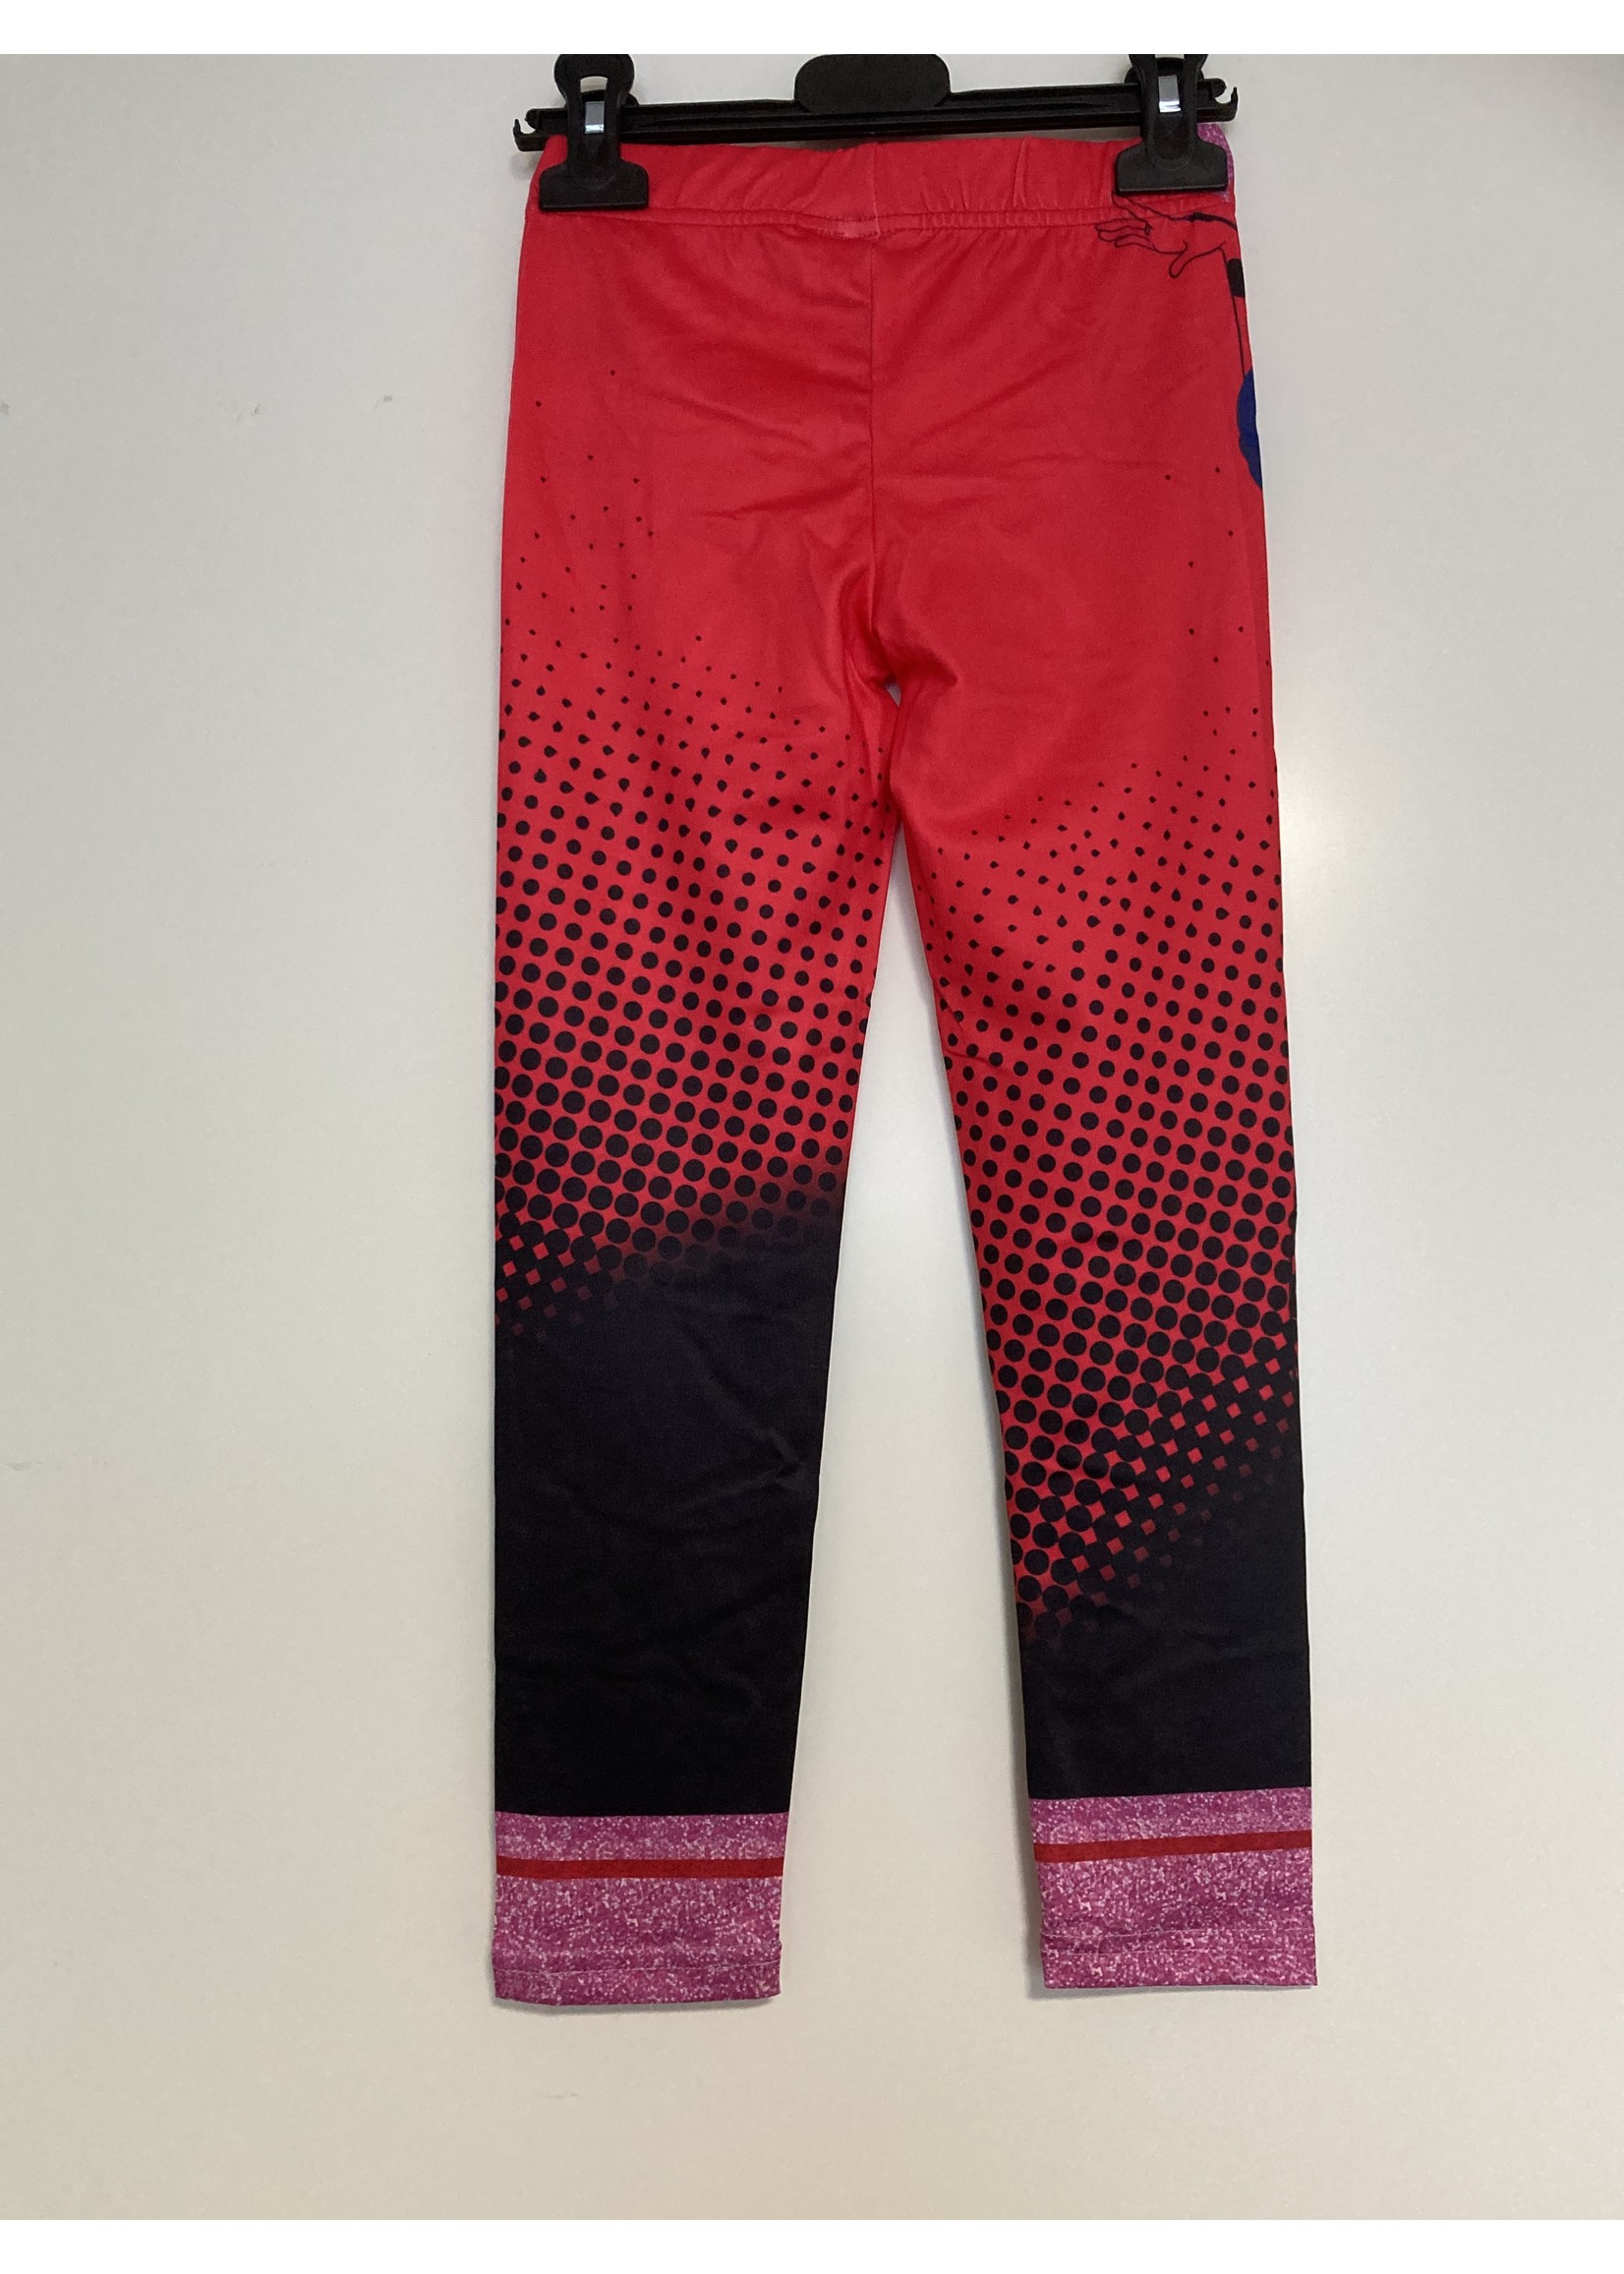 Miraculous Ladybug leggings from Miraculous red